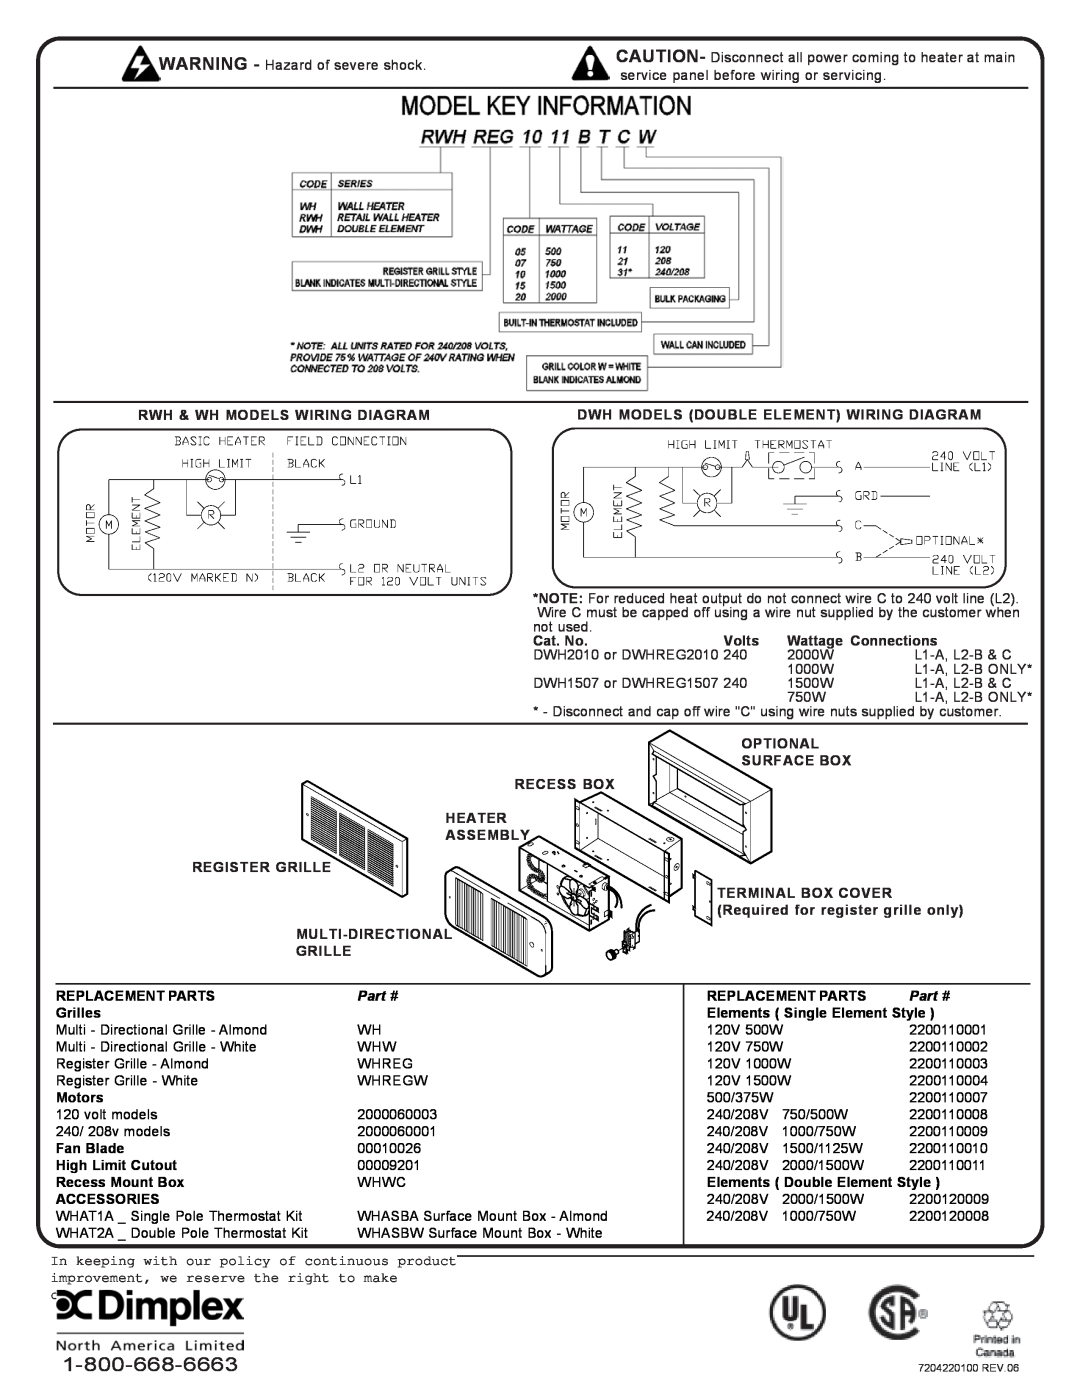 Dimplex 6100790000 Rwh & Wh Models Wiring Diagram, Dwh Models Double Element Wiring Diagram, Volts, Wattage Connections 